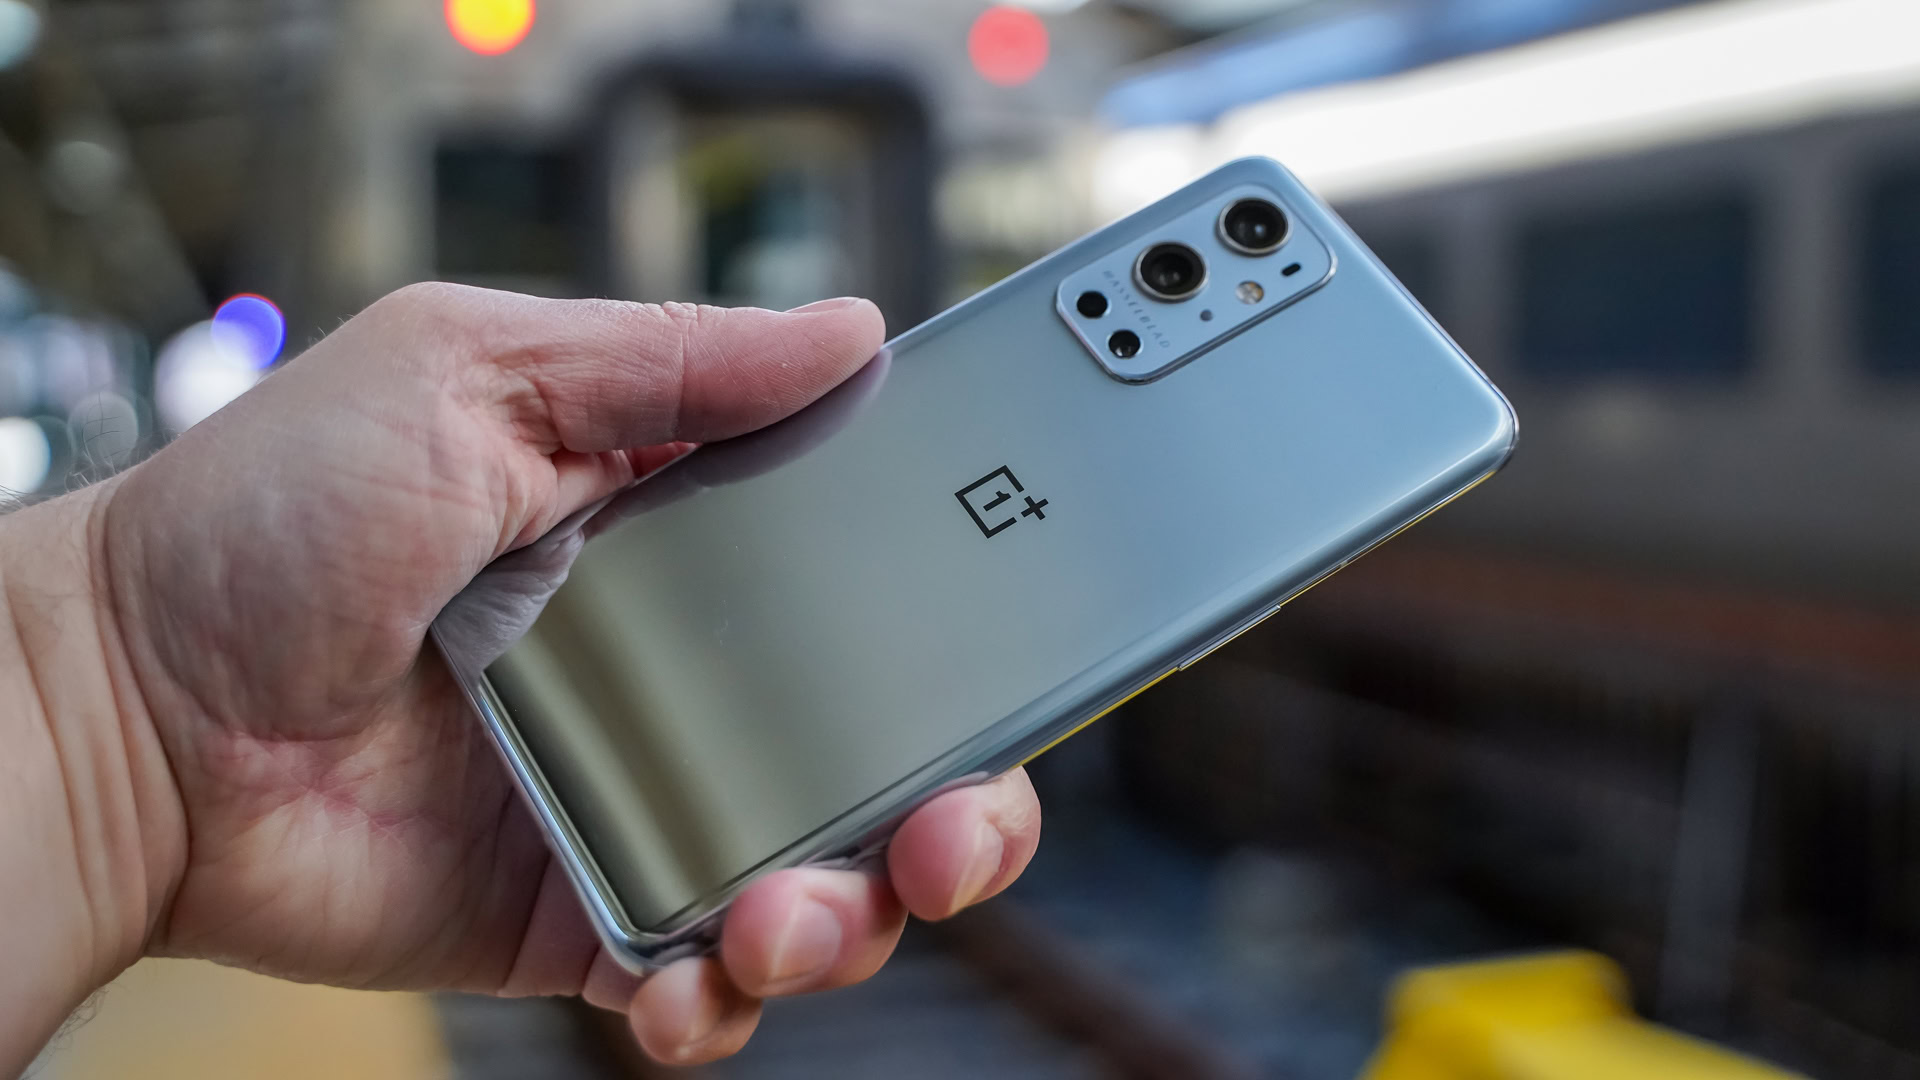 OnePlus 9 Pro review: A compelling alternative to Apple and Samsung